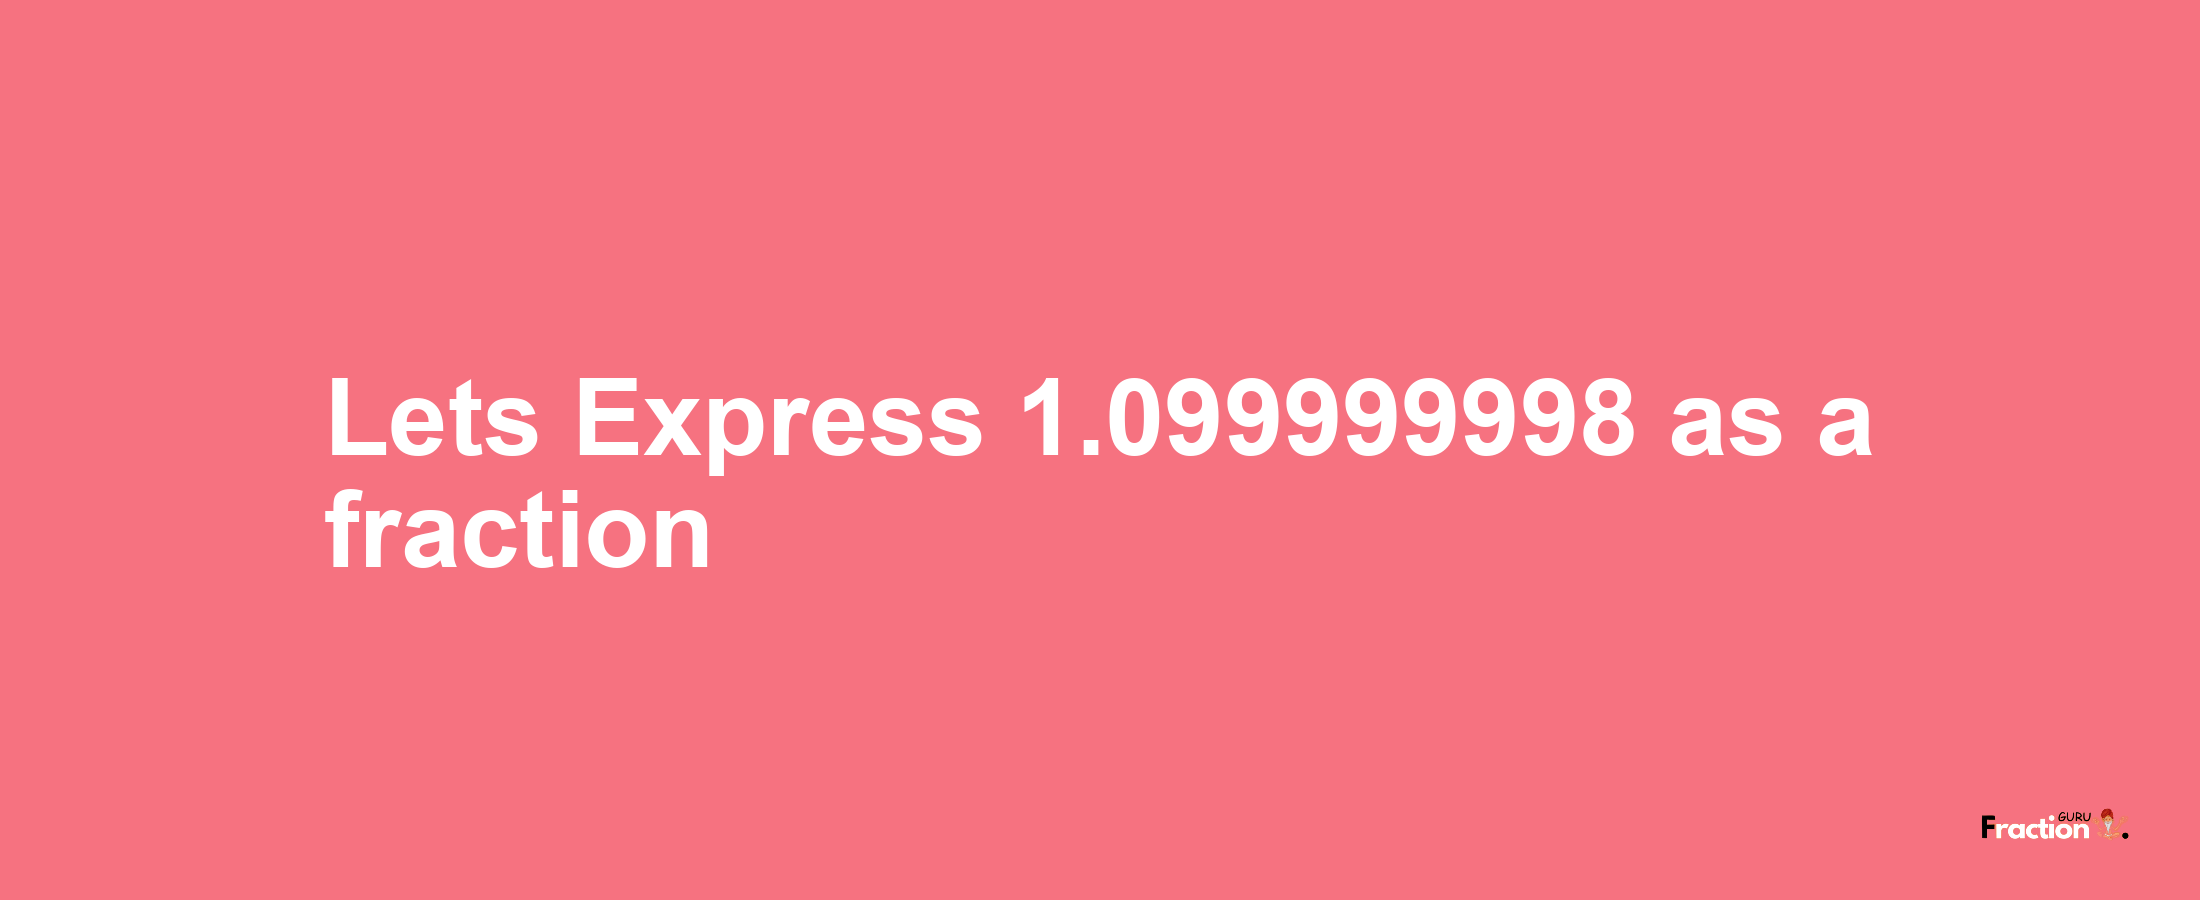 Lets Express 1.099999998 as afraction